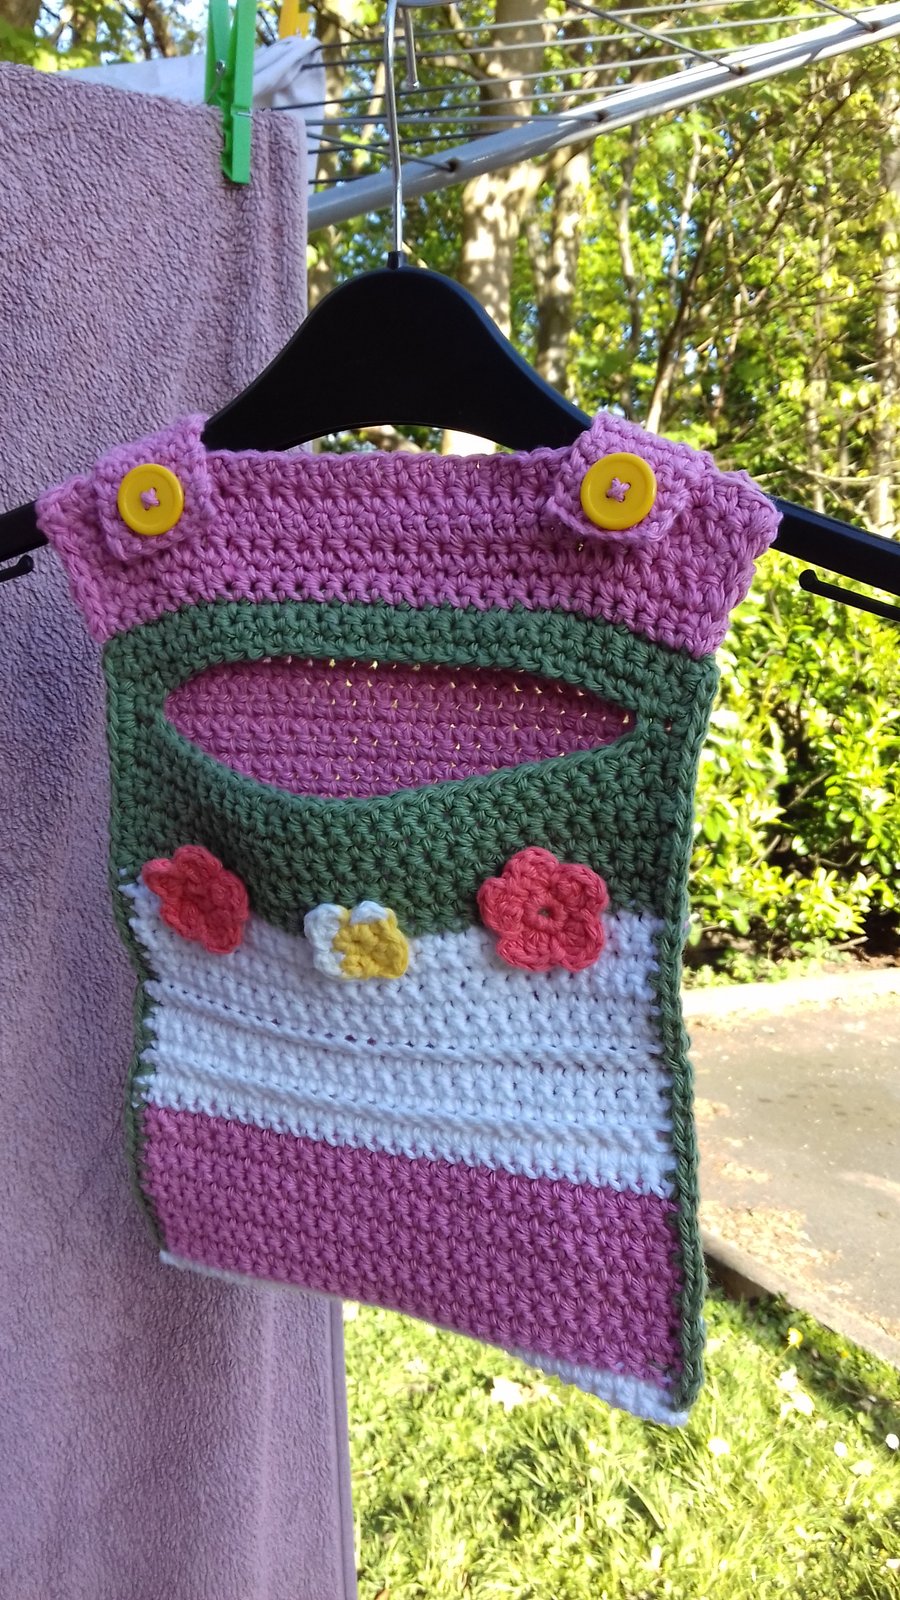 Peg Bag In Pink, Green and White With Flowers